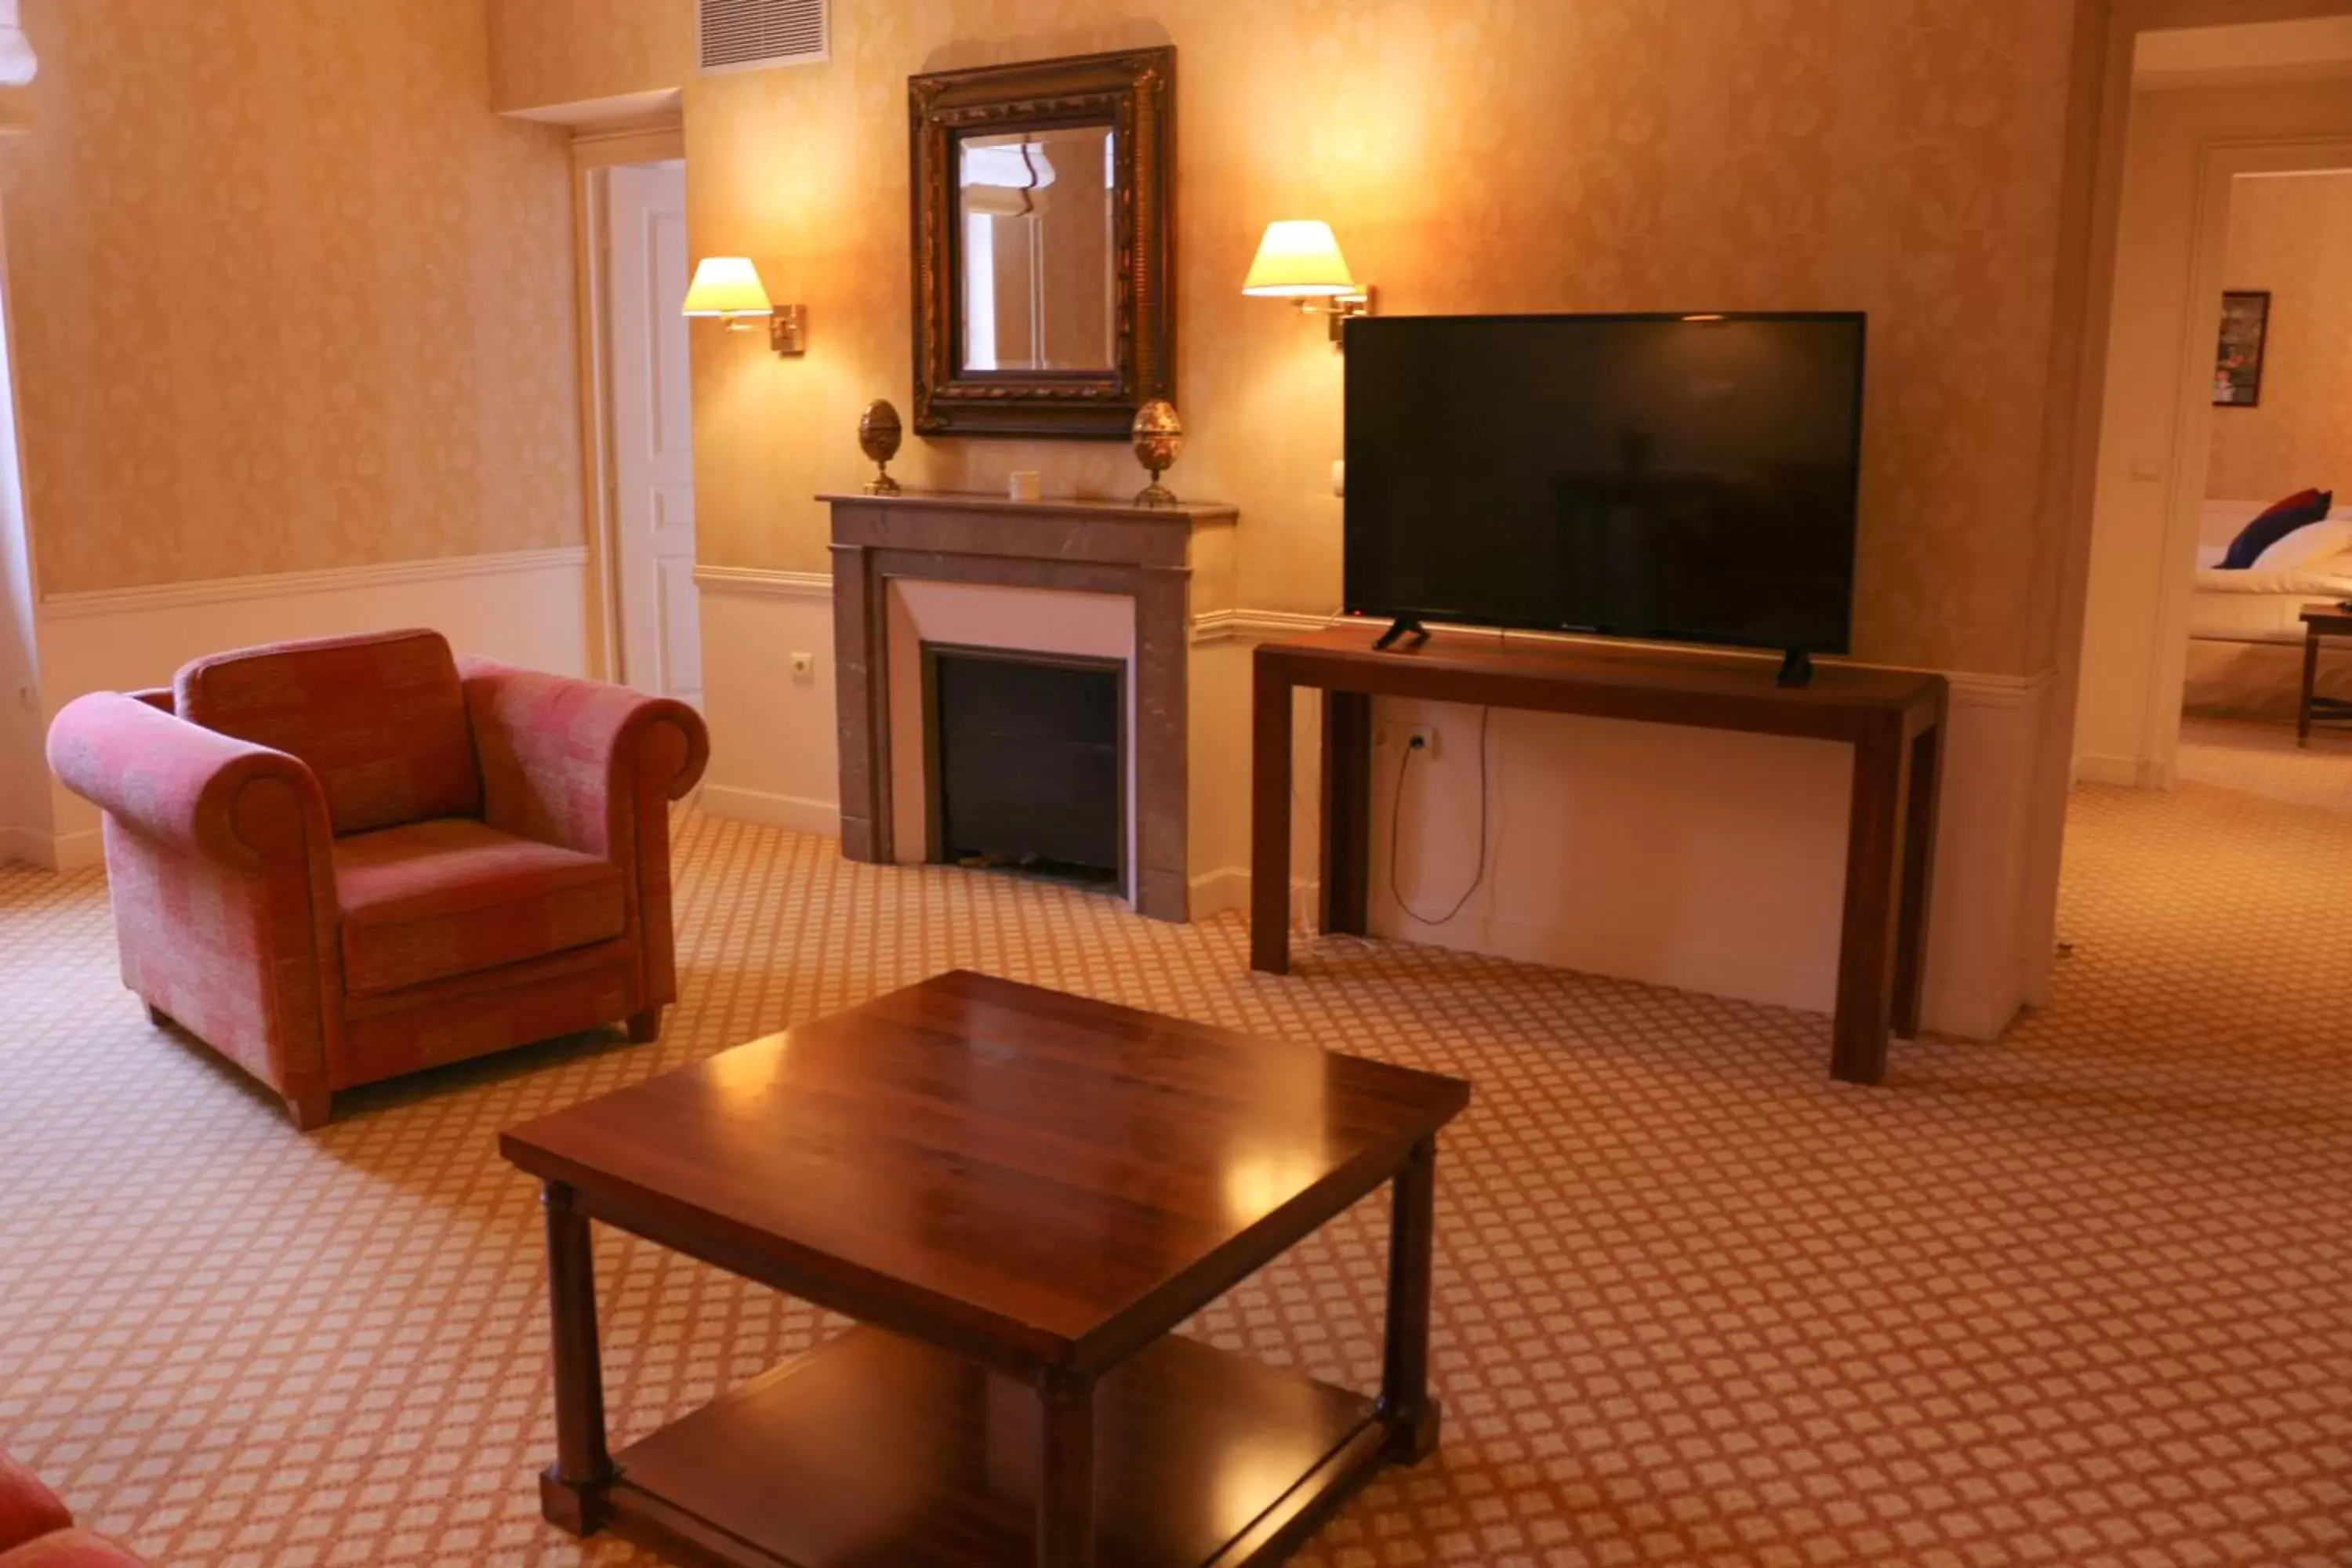 TV and multimedia, TV/Entertainment Center in Le Domaine des Roches, Hotel & Spa